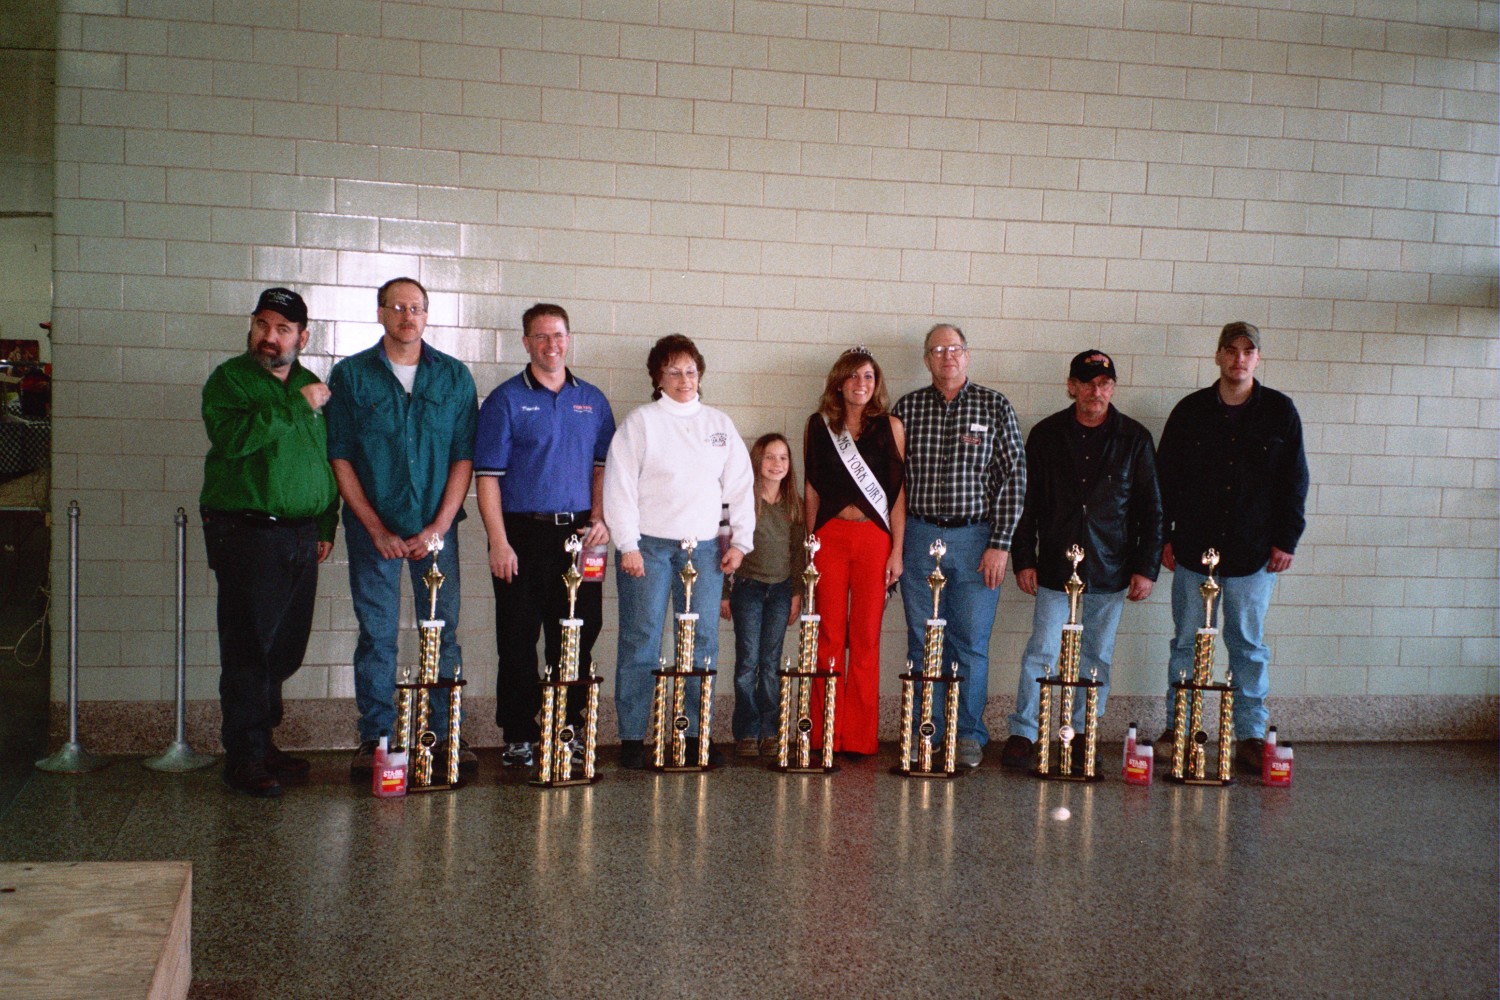 Best in Sow winners at Dirt Trackin' 2005
